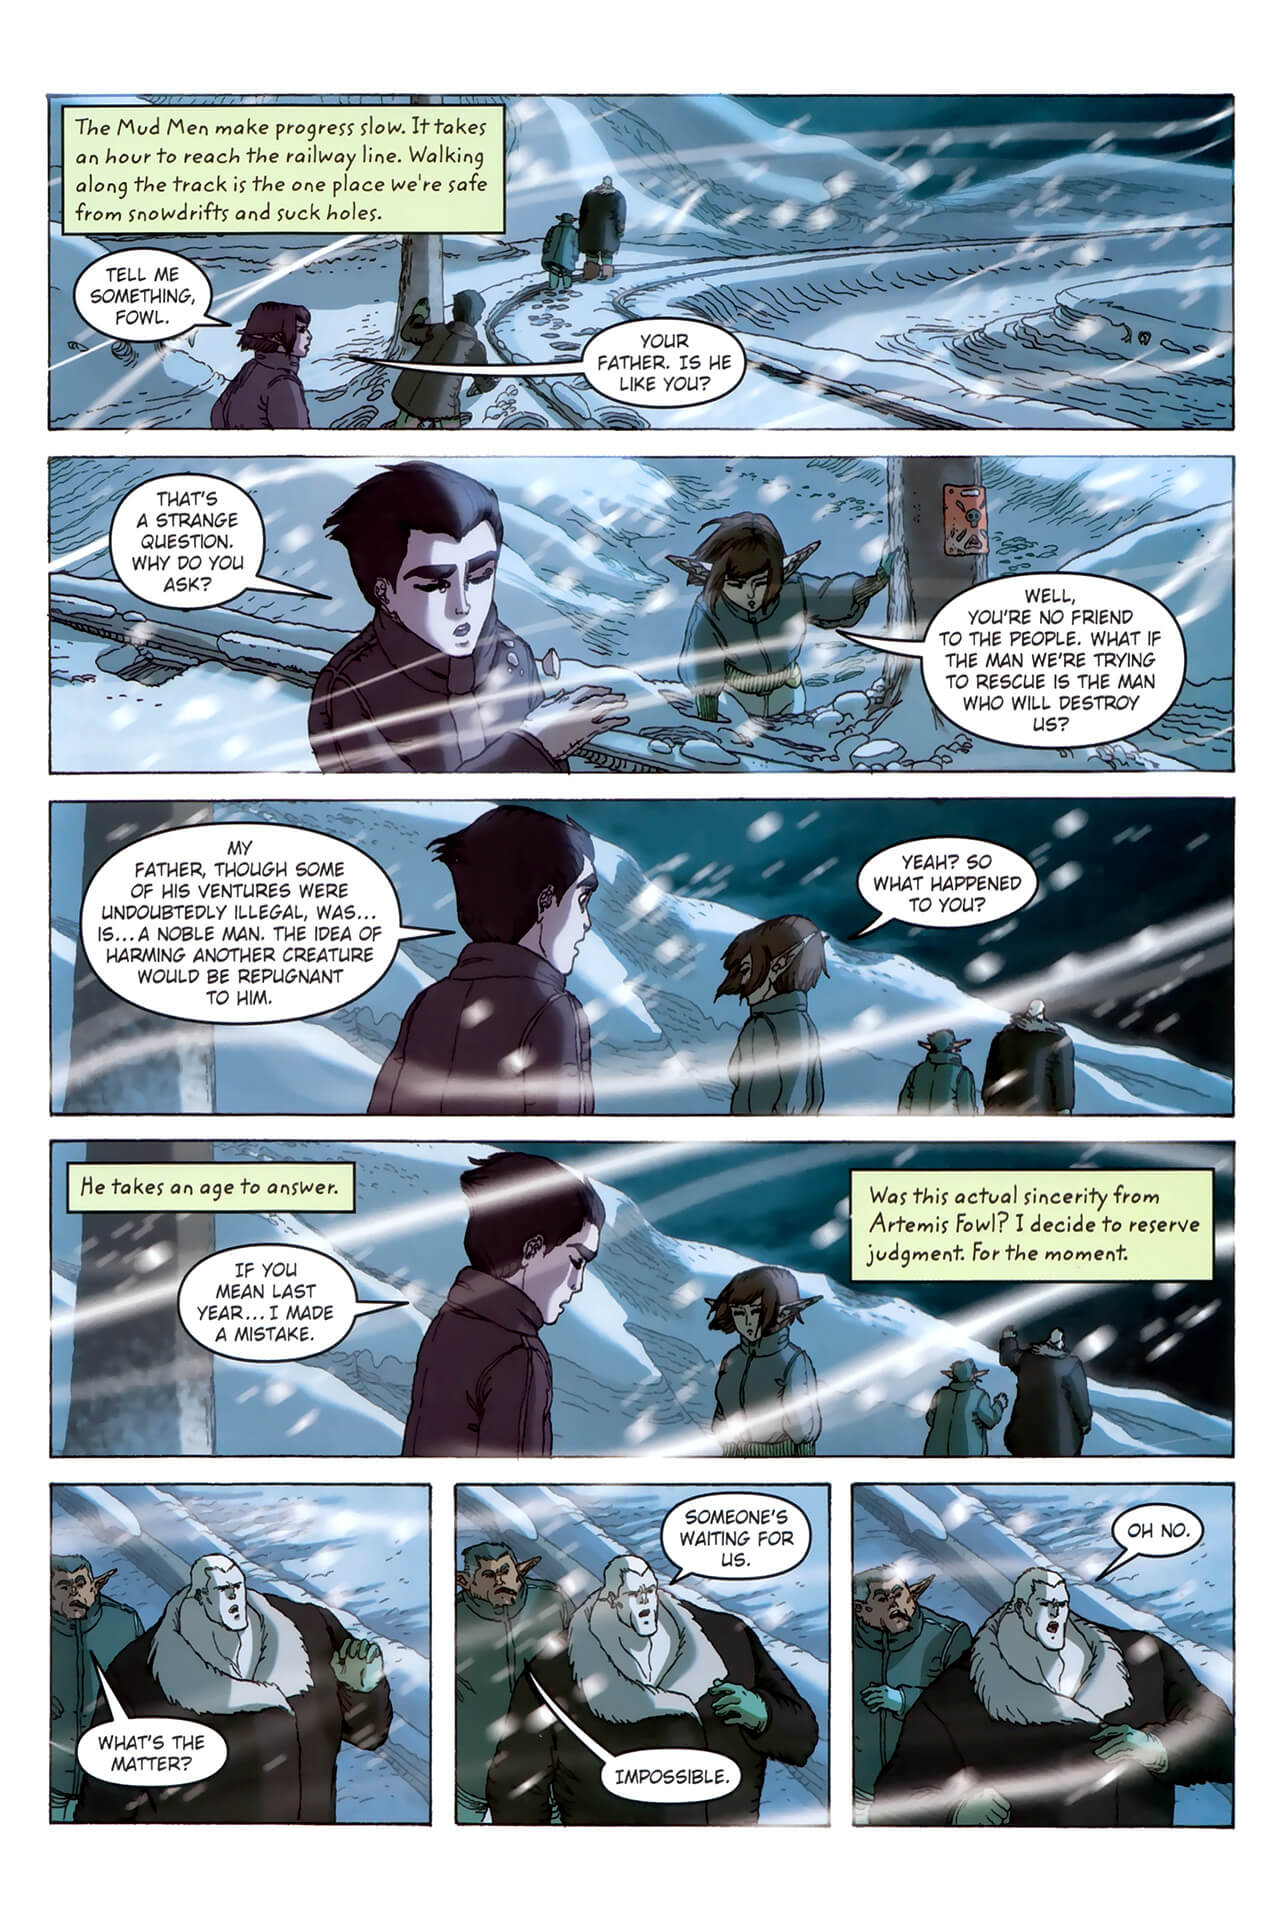 page 57 of artemis fowl the arctic incident graphic novel